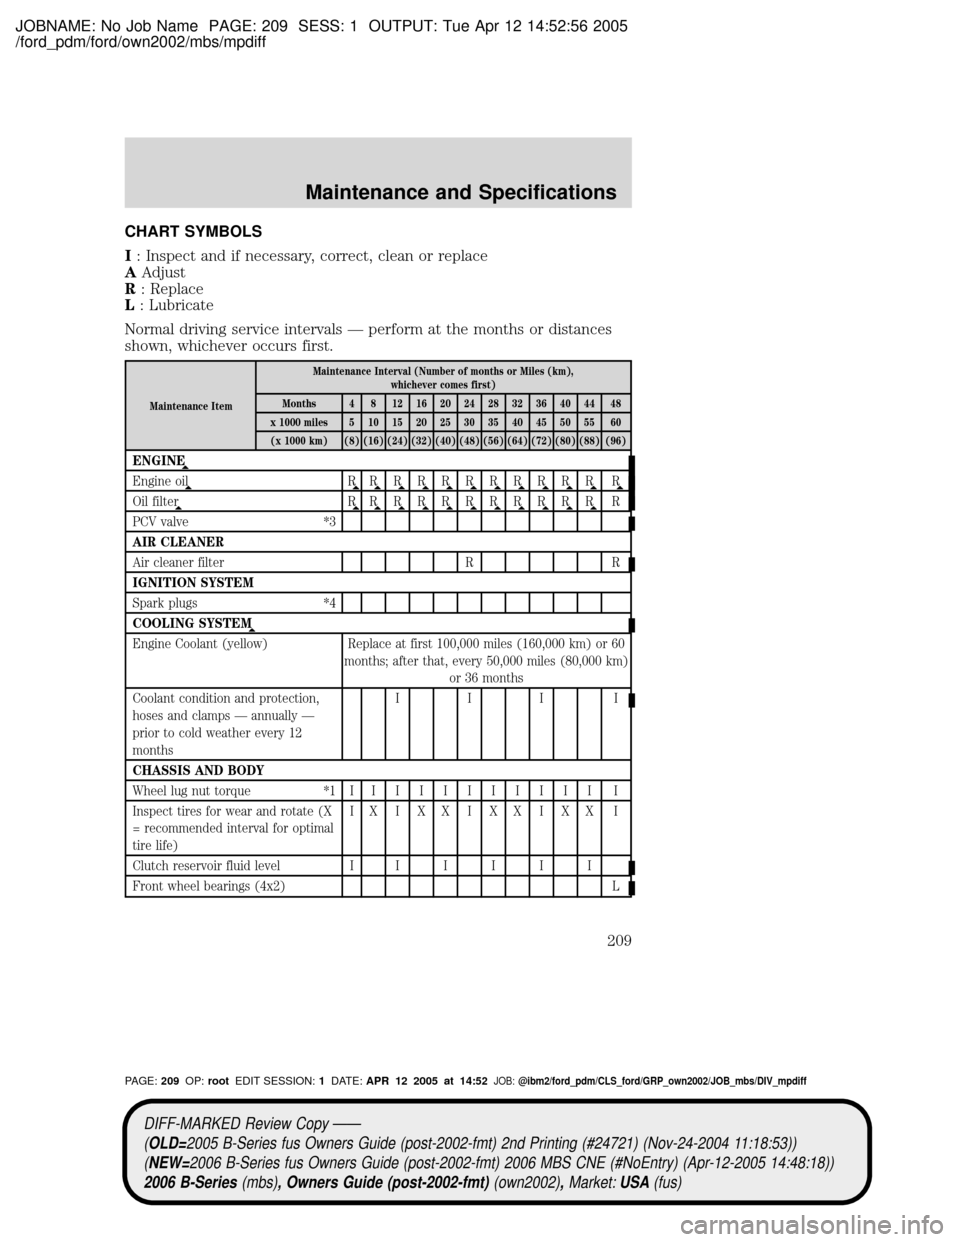 MAZDA MODEL B2300 TRUCK 2006  Owners Manual (in English) JOBNAME: No Job Name PAGE: 209 SESS: 1 OUTPUT: Tue Apr 12 14:52:56 2005
/ford_pdm/ford/own2002/mbs/mpdiff
CHART SYMBOLS
I: Inspect and if necessary, correct, clean or replace
AAdjust
R: Replace
L: Lub